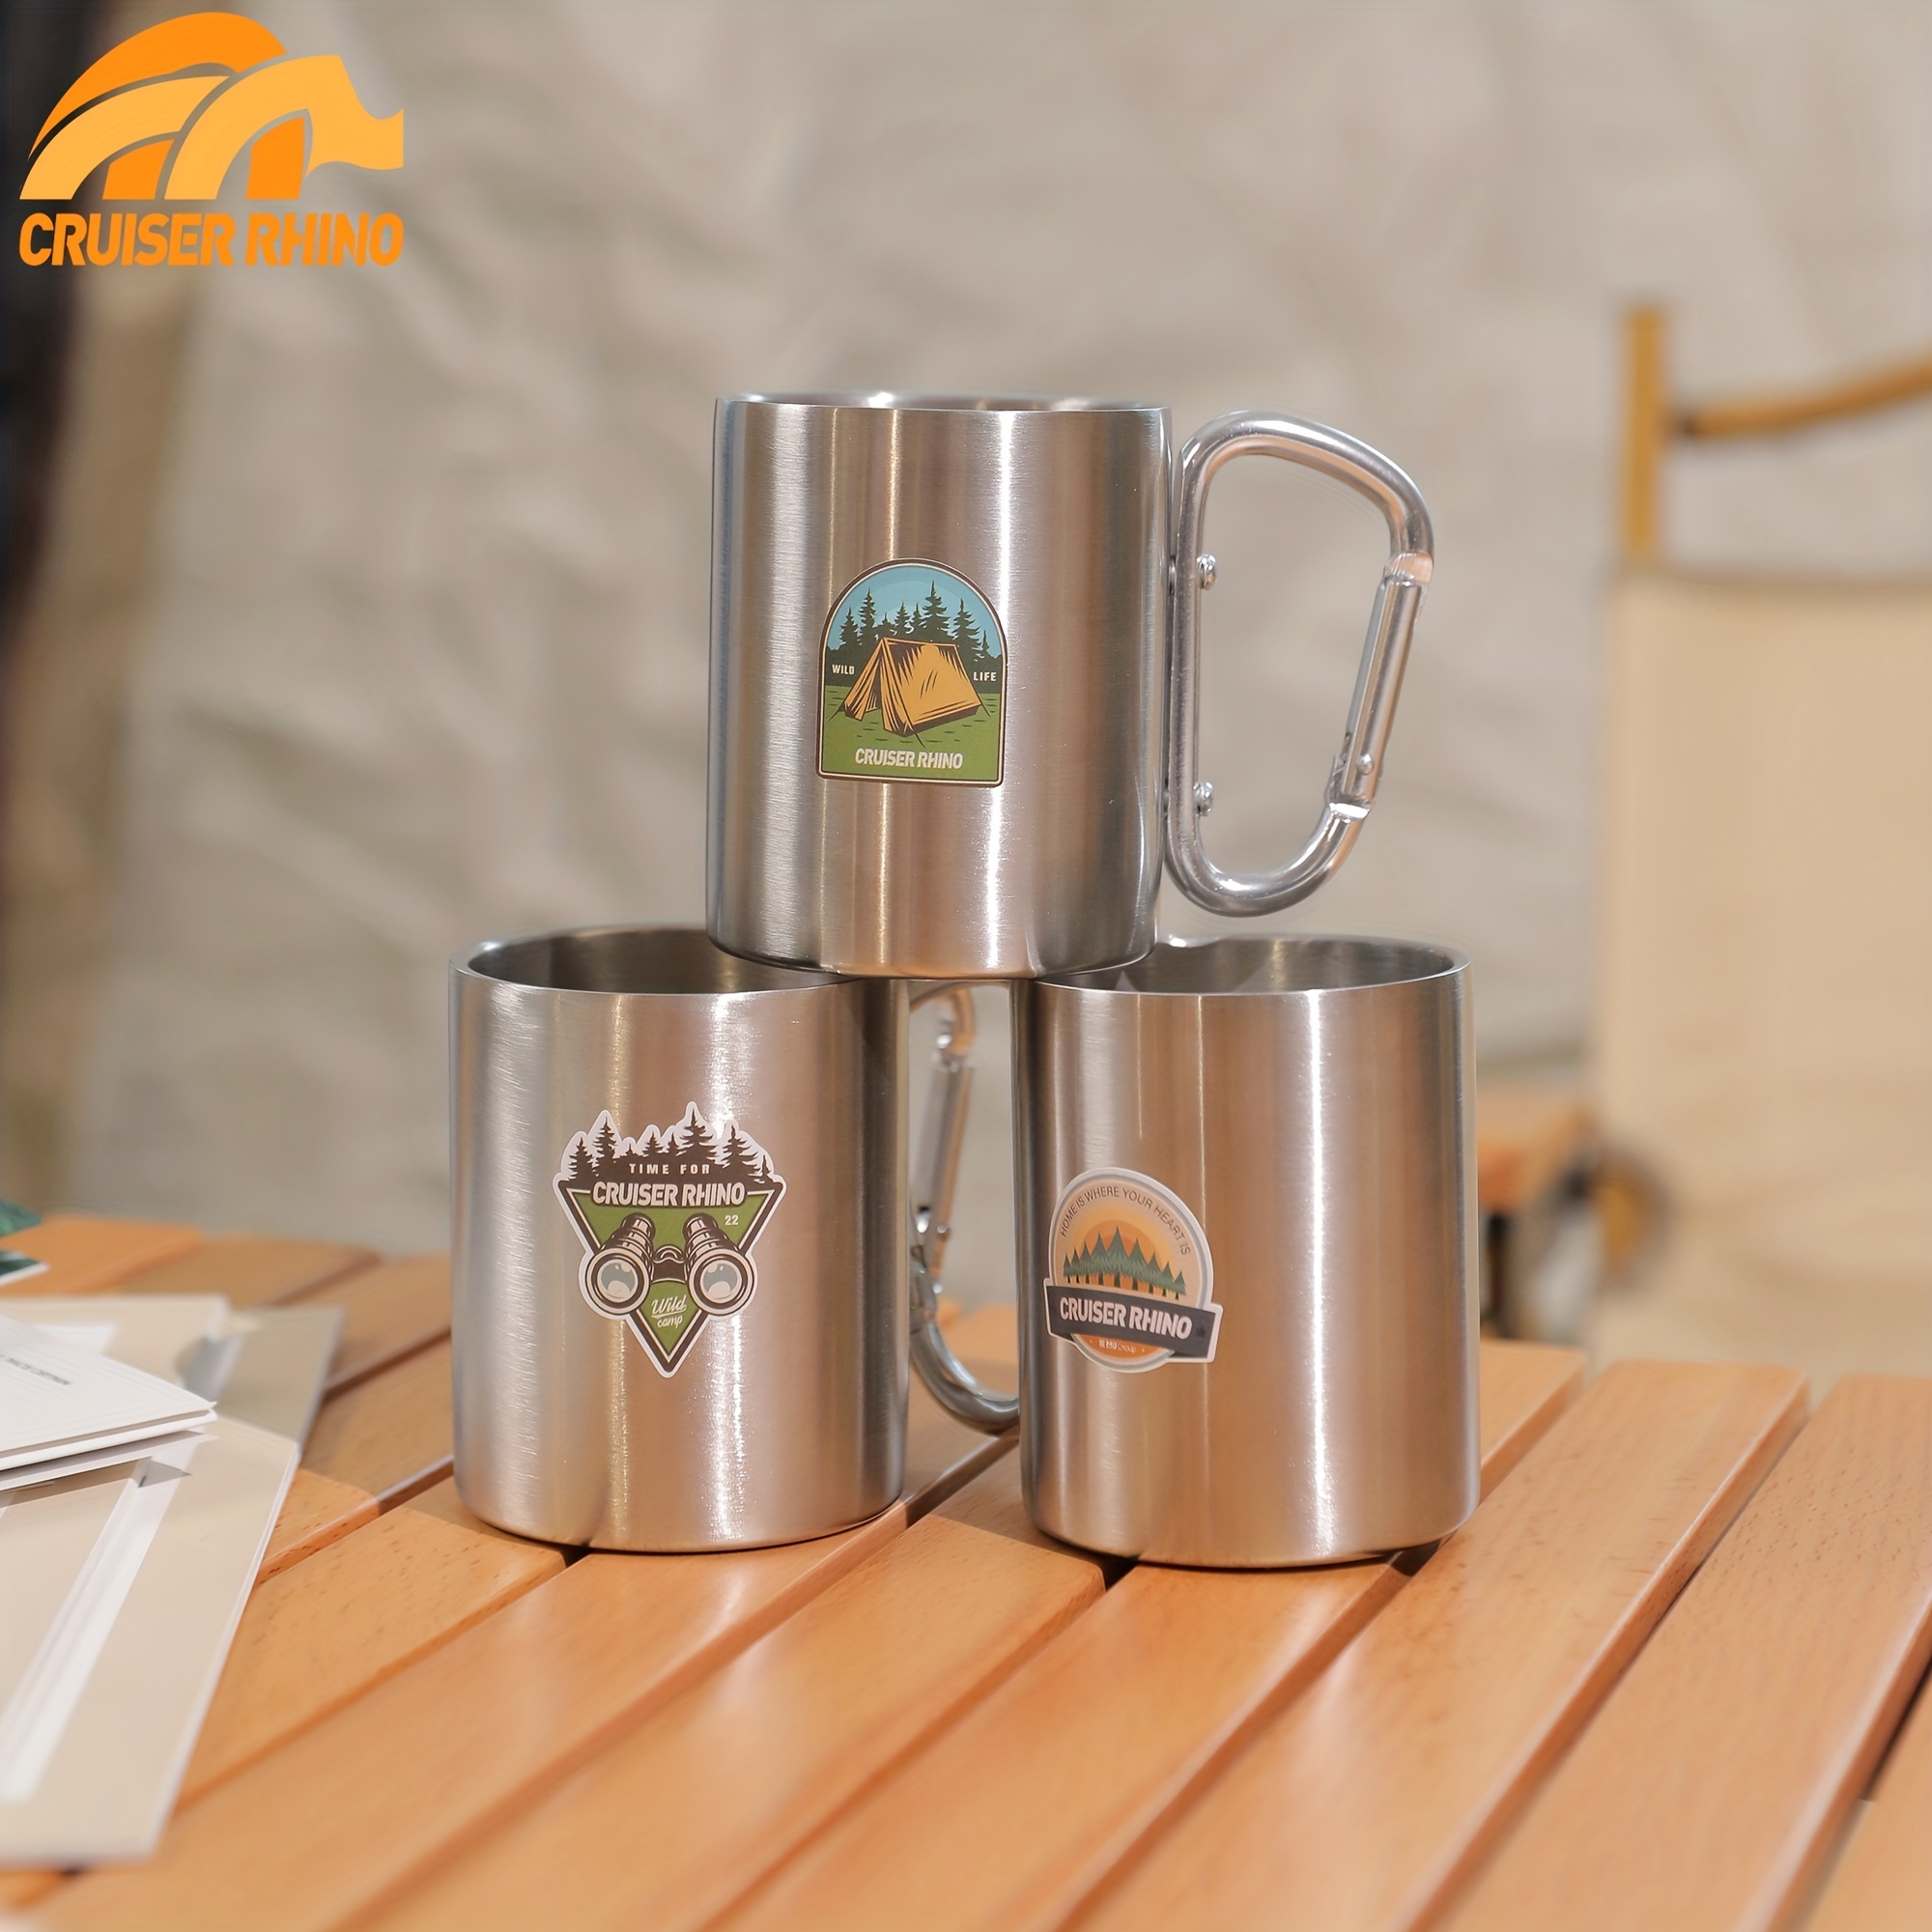 3PCS Stainless Steel Cups, Double Wall 10Oz / 300Ml, 304 Stainless